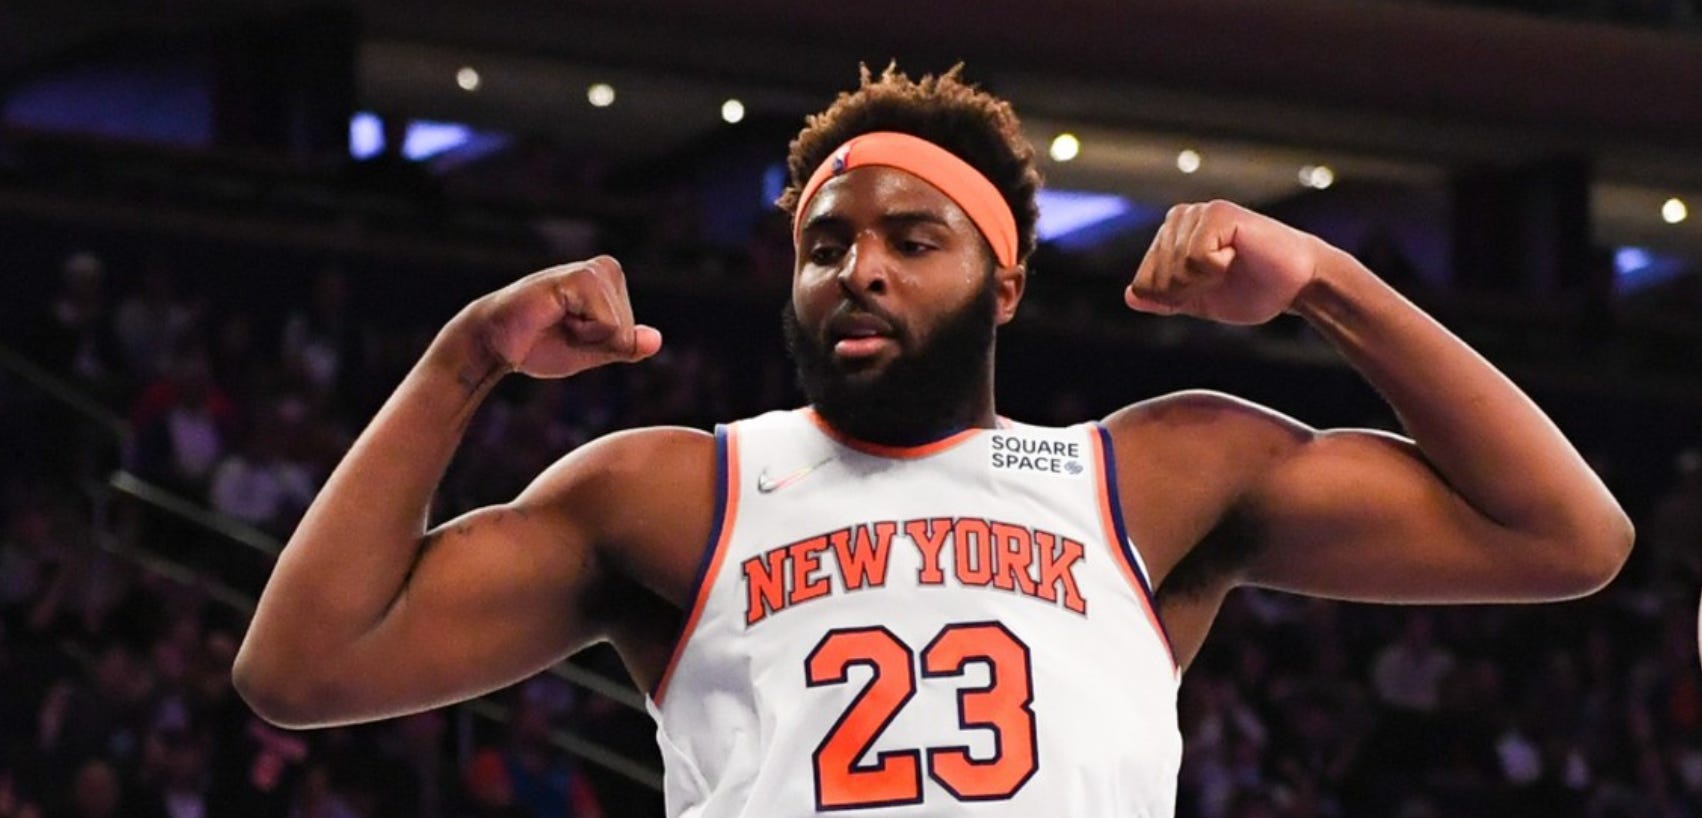 Get ready for the NBA Playoffs with New York Knicks gear